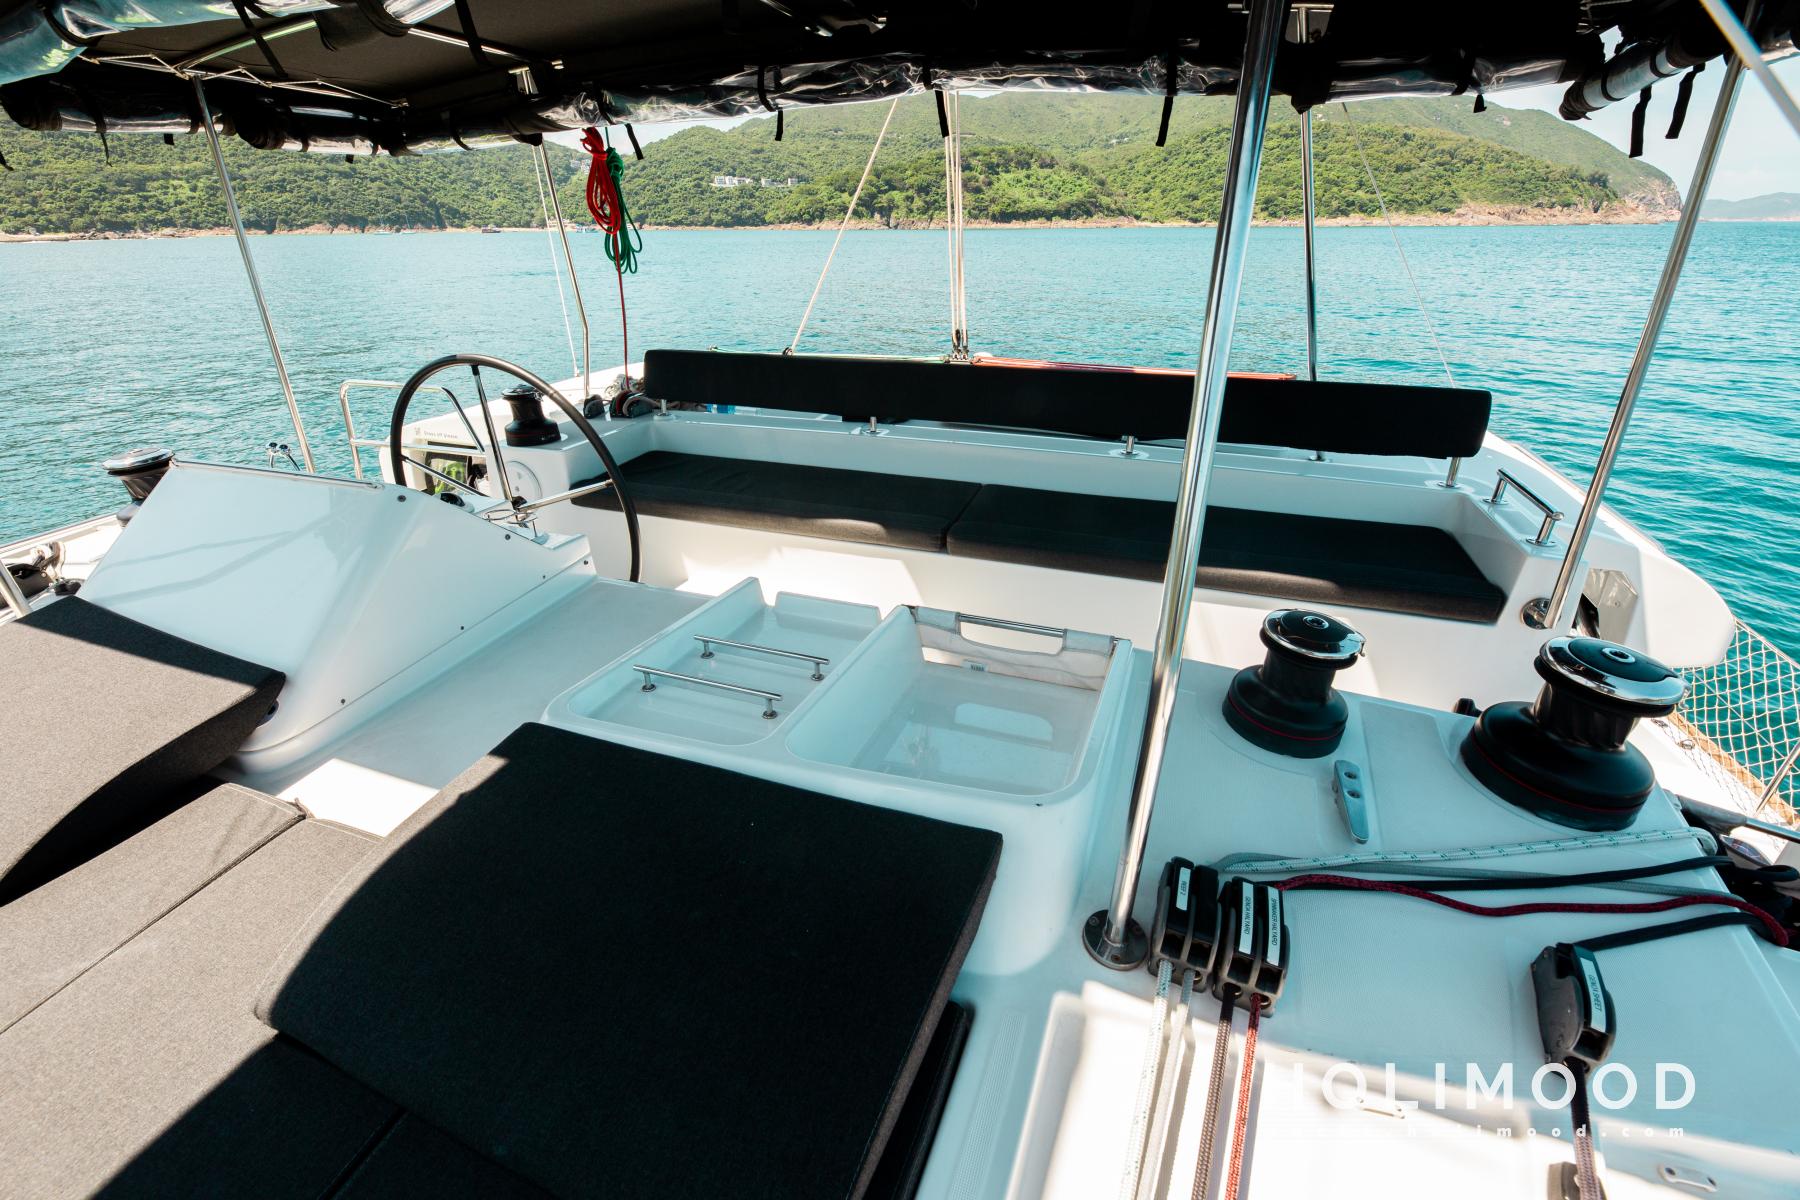 SL01 Catamaran Party Package (Free BBQ Lunch + Swimming Pool + Sailing Exp) 11